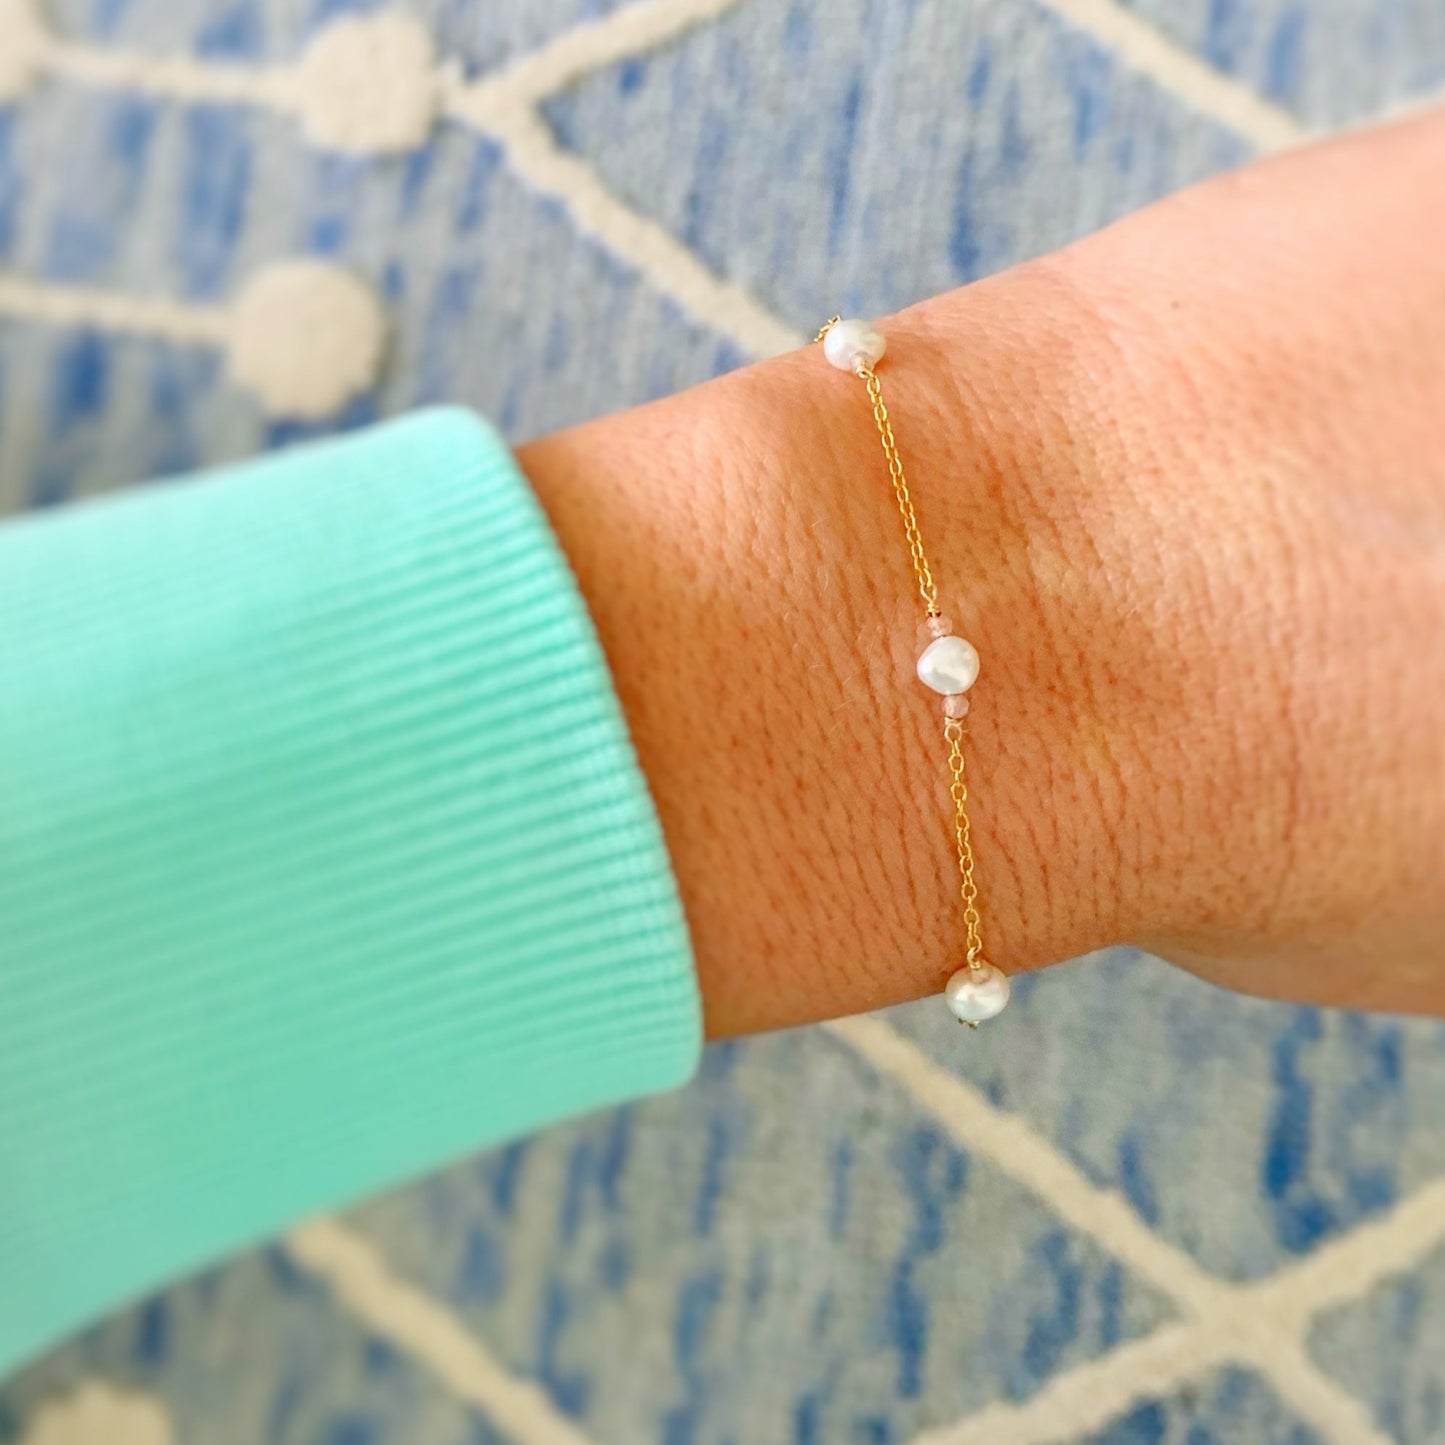 the mermaids and madeleines bristol bracelet is created with 14k gold filled chain, freshwater pearls and peach moonstone in a station style bracelet with an adjustable clasp. this is a photograph of the bracelet on a wrist